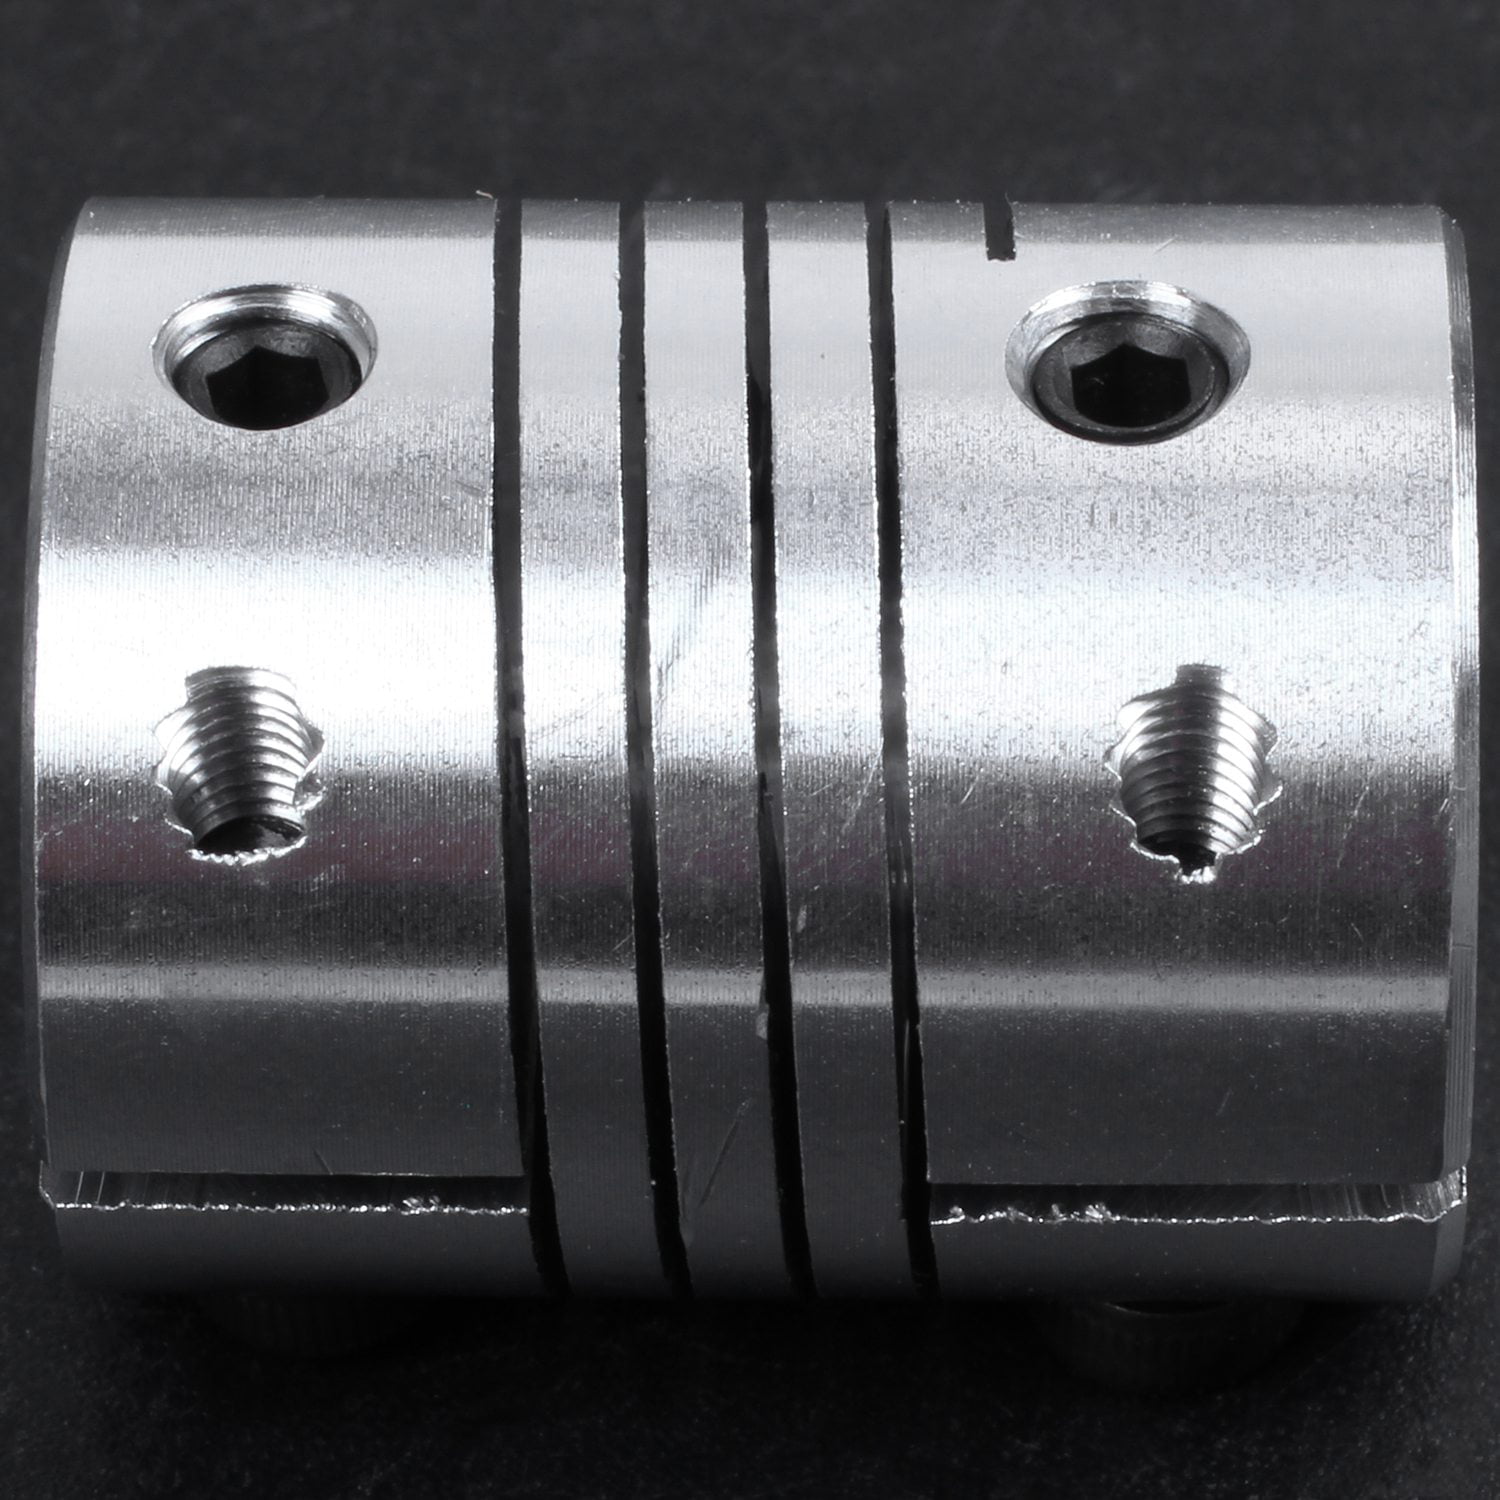 Tulead CNC Motor Couping 6 x 6mm Dia Aluminum Silver Shaft Stepper Coupler Pack of 2 with Wrench 